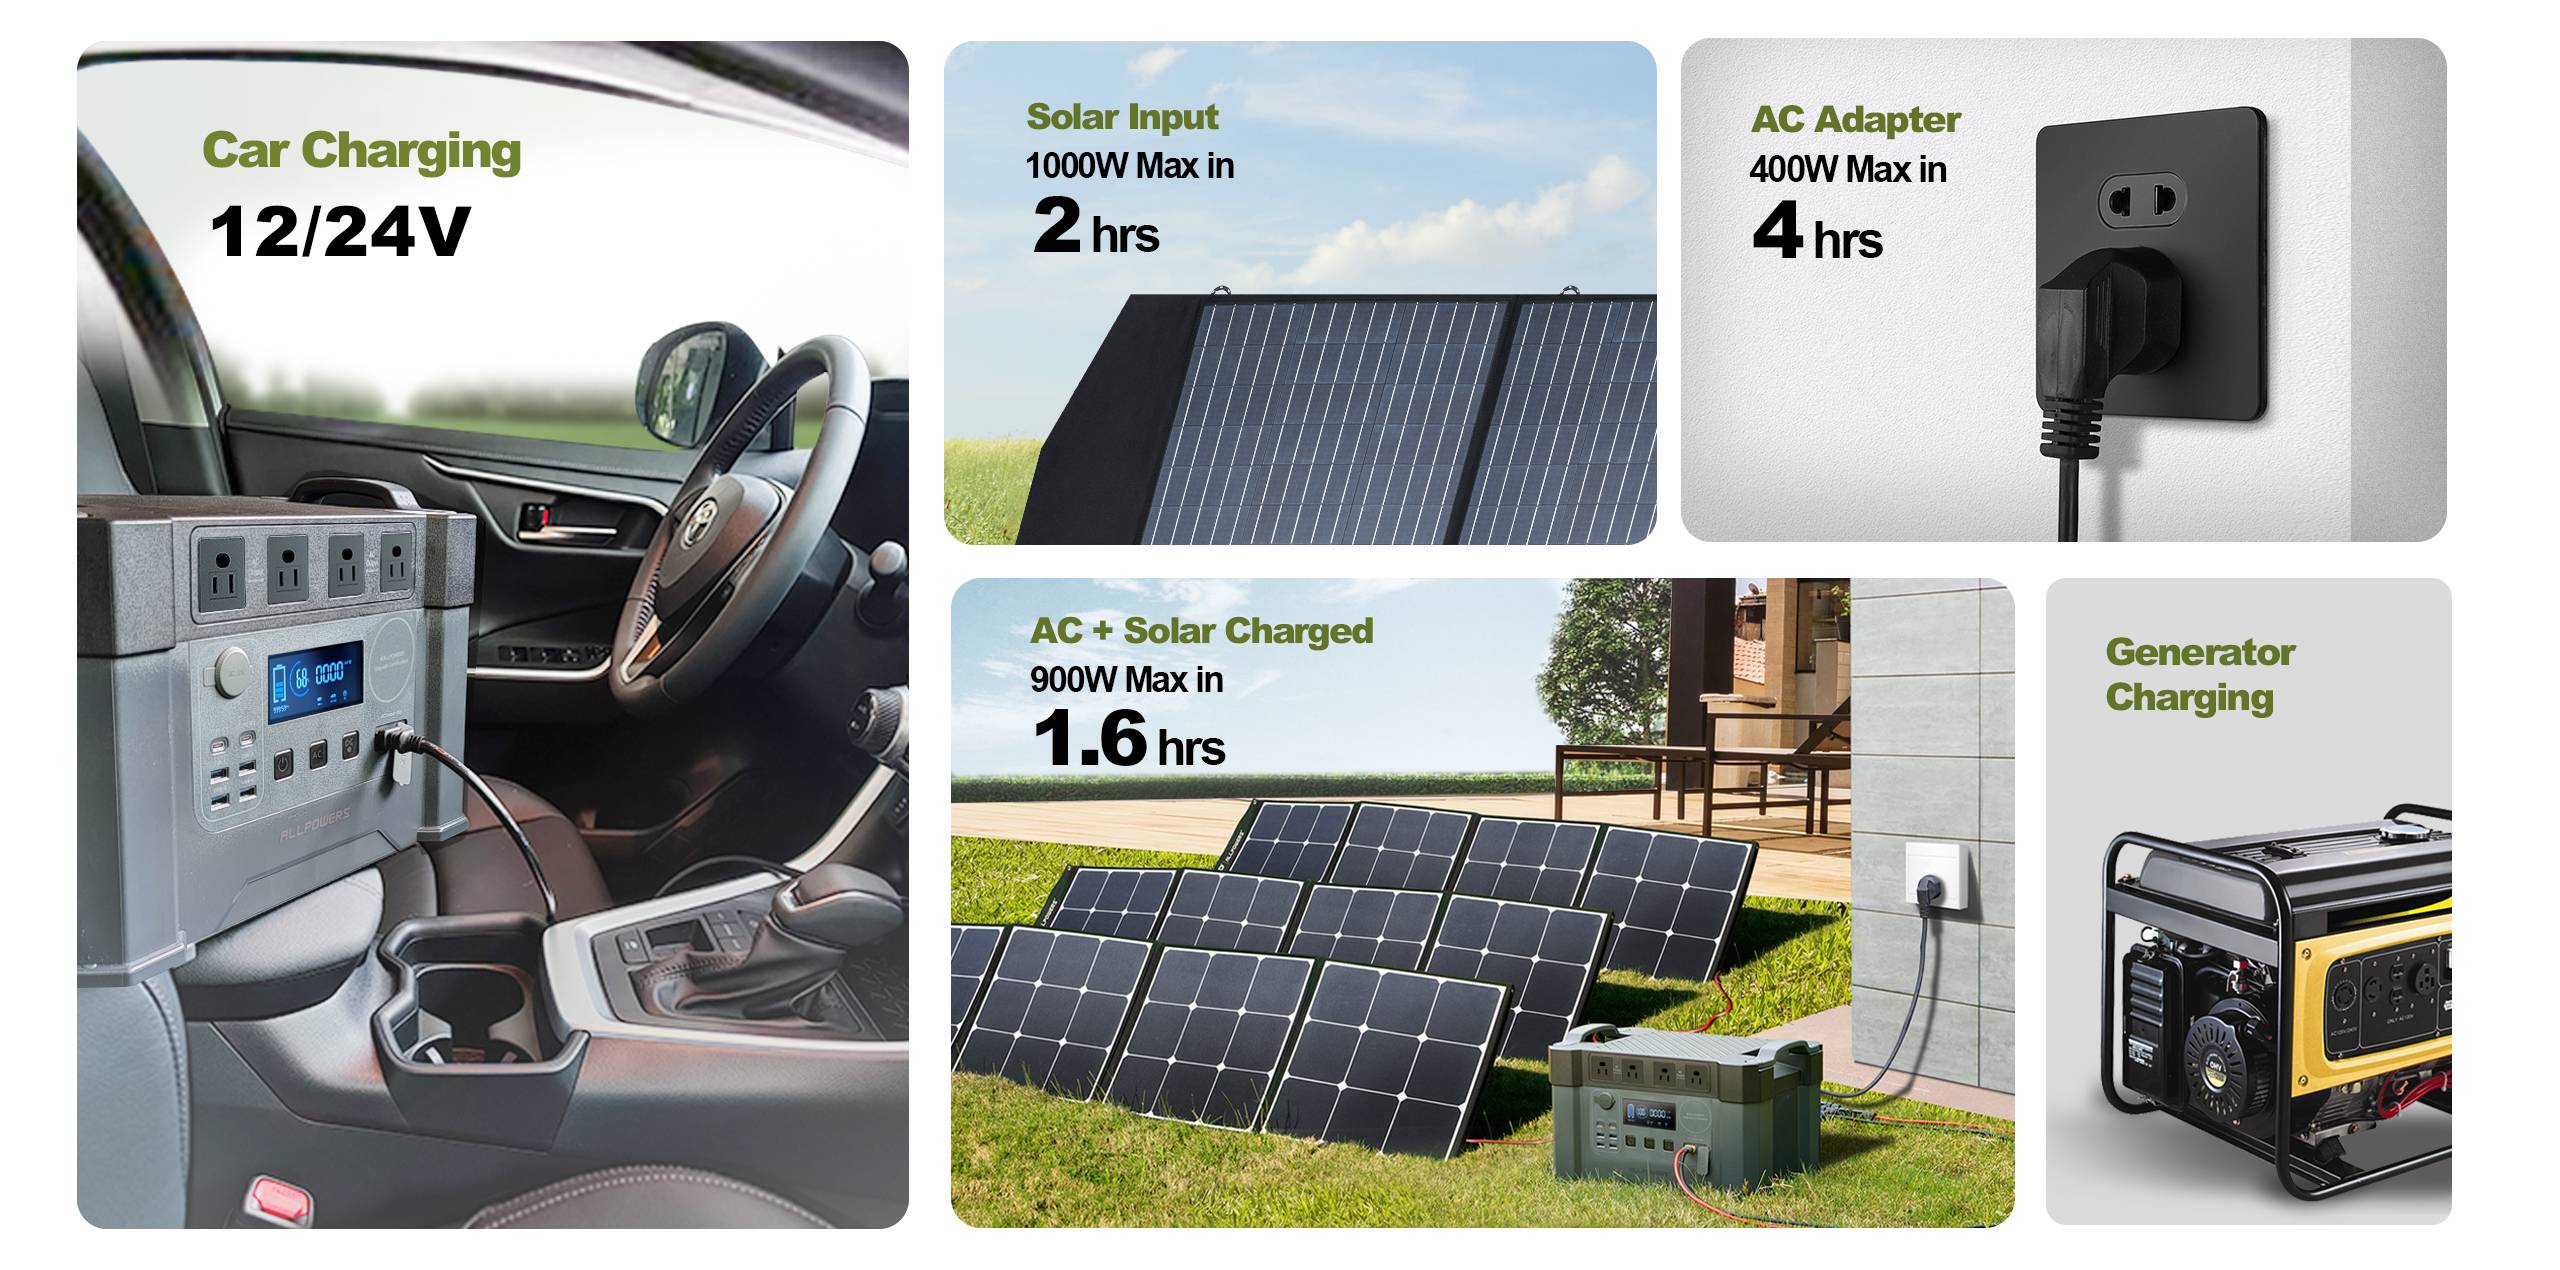 ALLPOWERS S2000 2000W 1500Wh Portable Power Station Solar